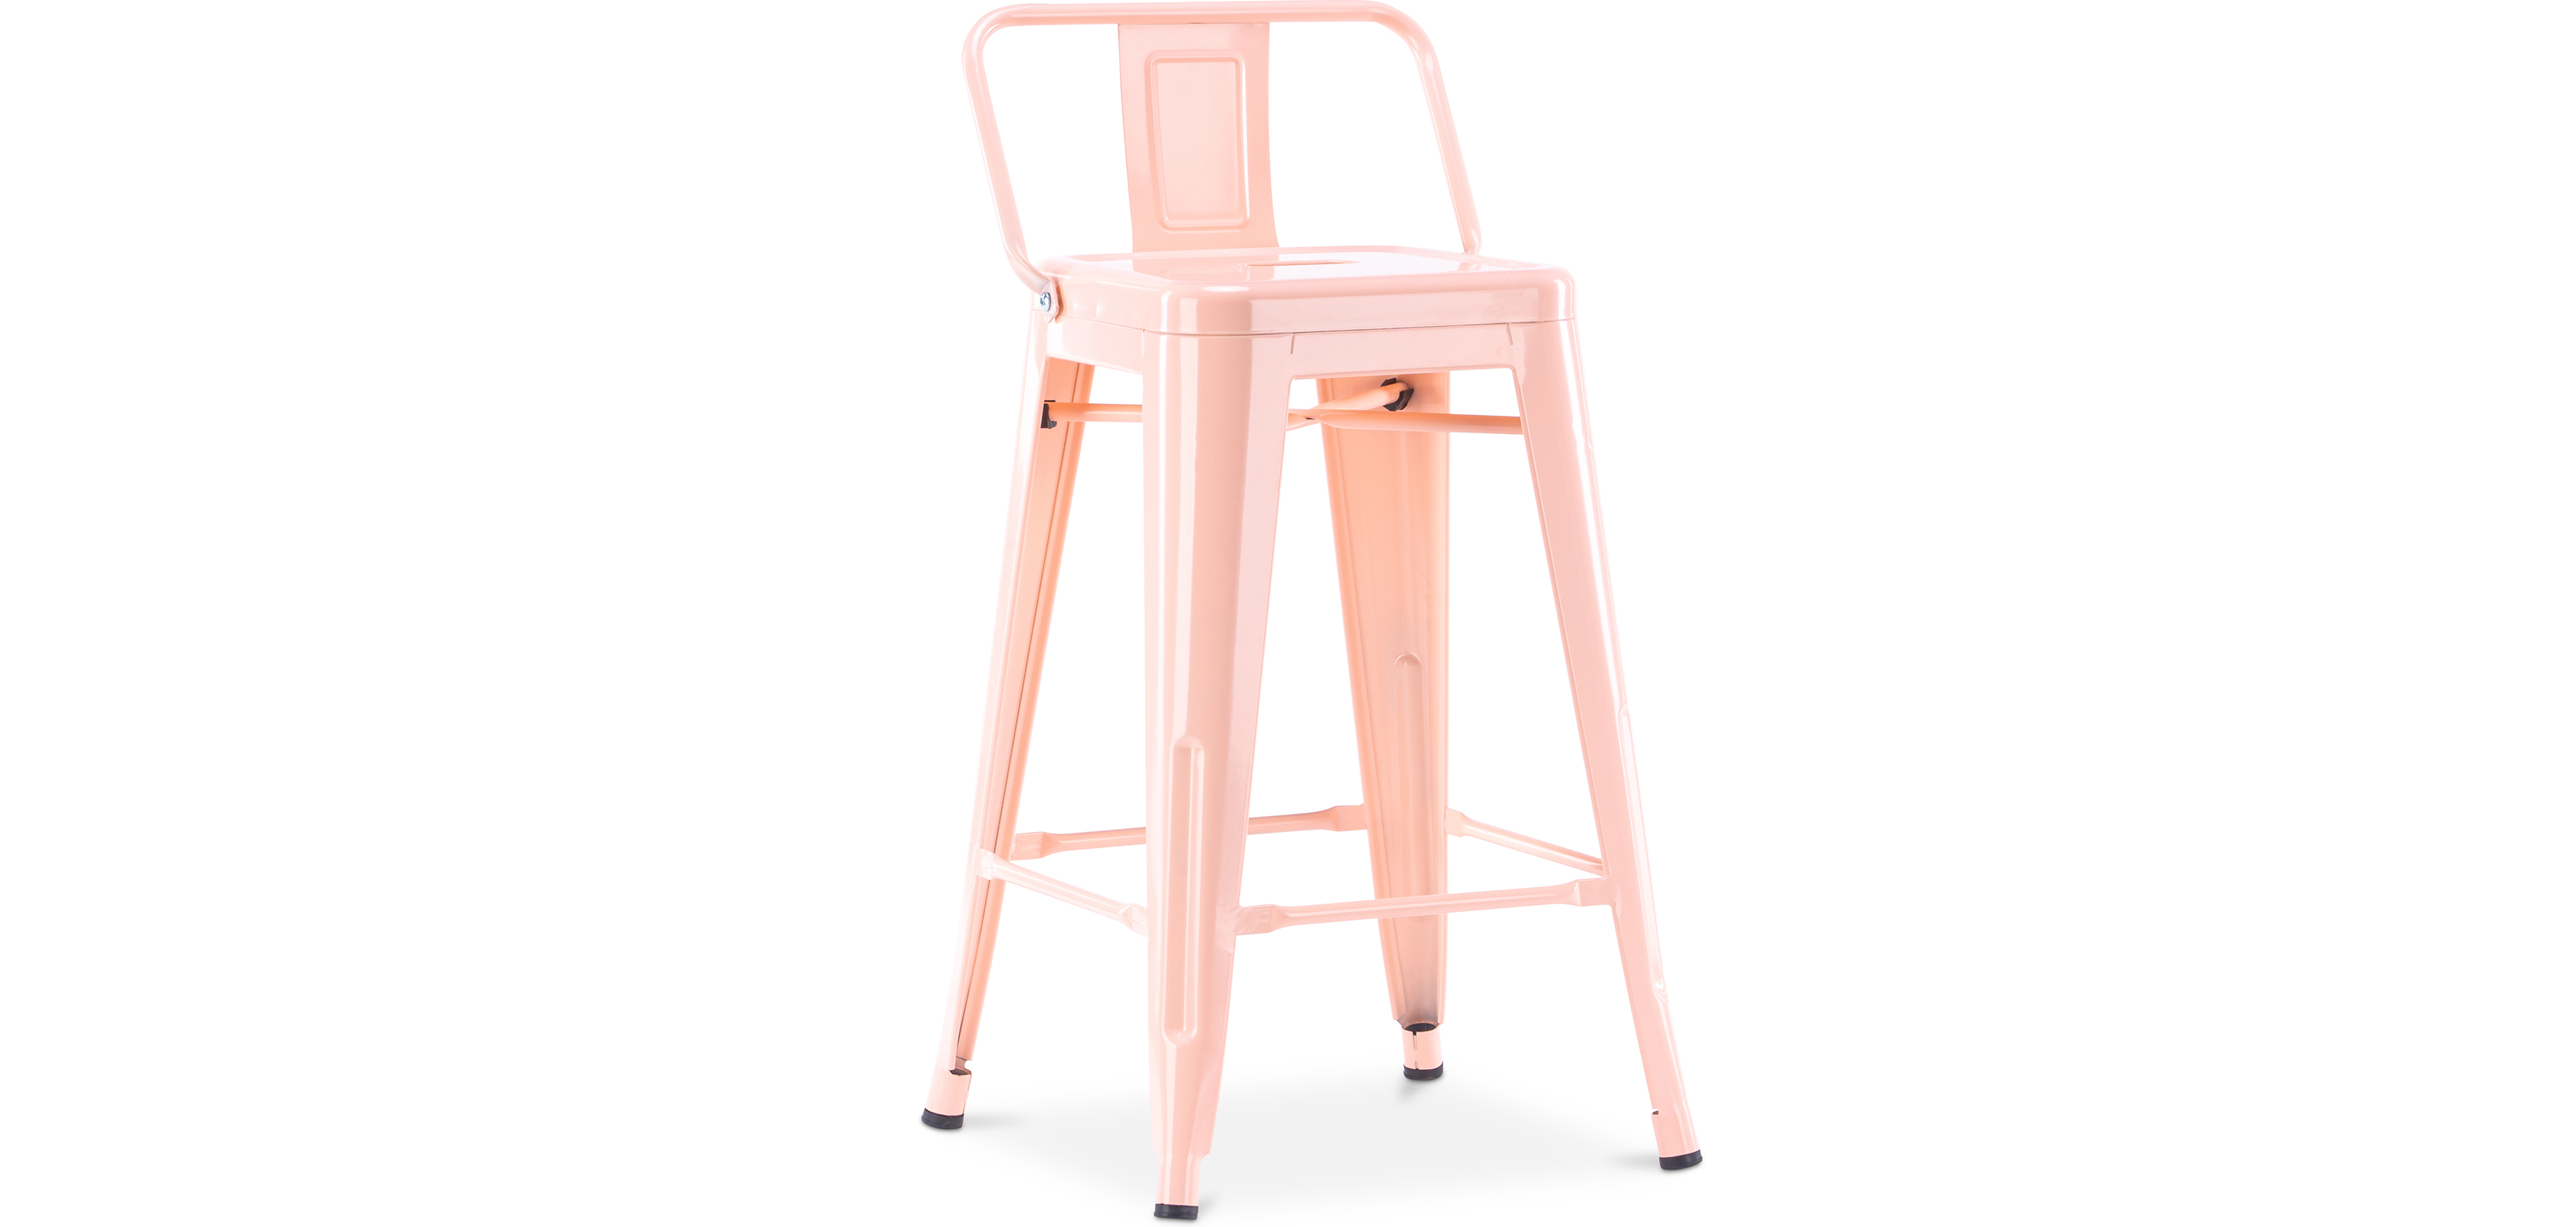 Buy Bistrot Metalix bar stool with small backrest - 60cm Pastel orange 58409 - in the UK